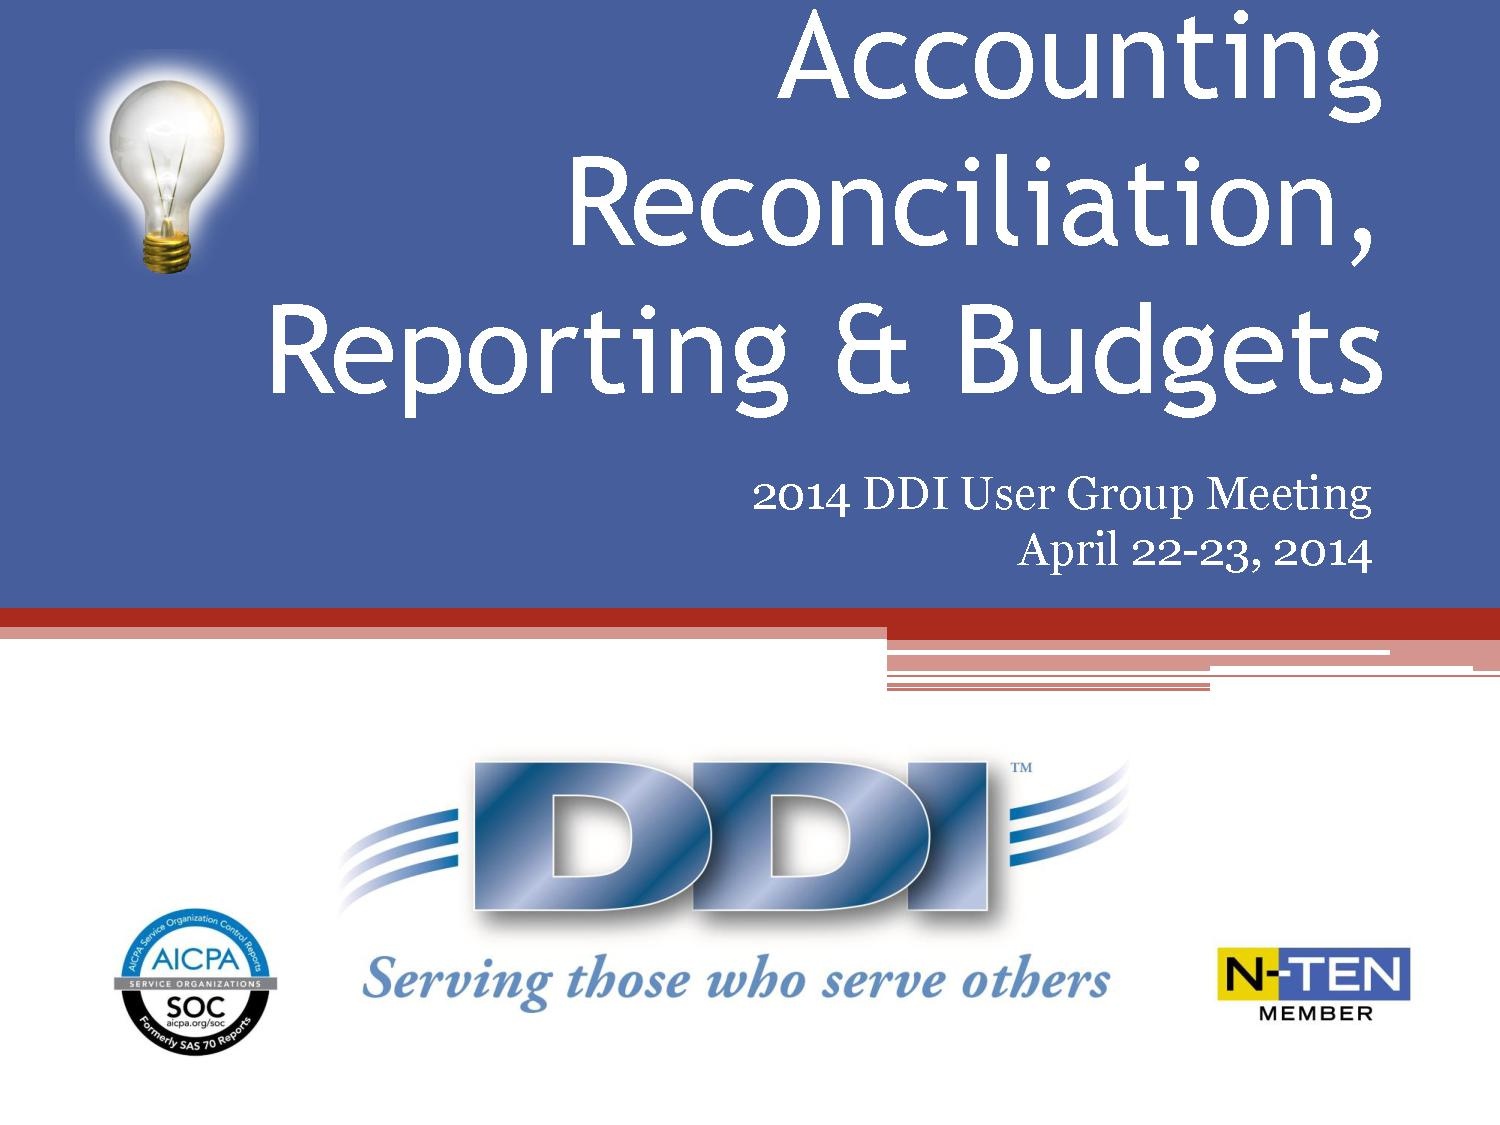 Accounting Reconciliation Reporting & Budgets.pdf